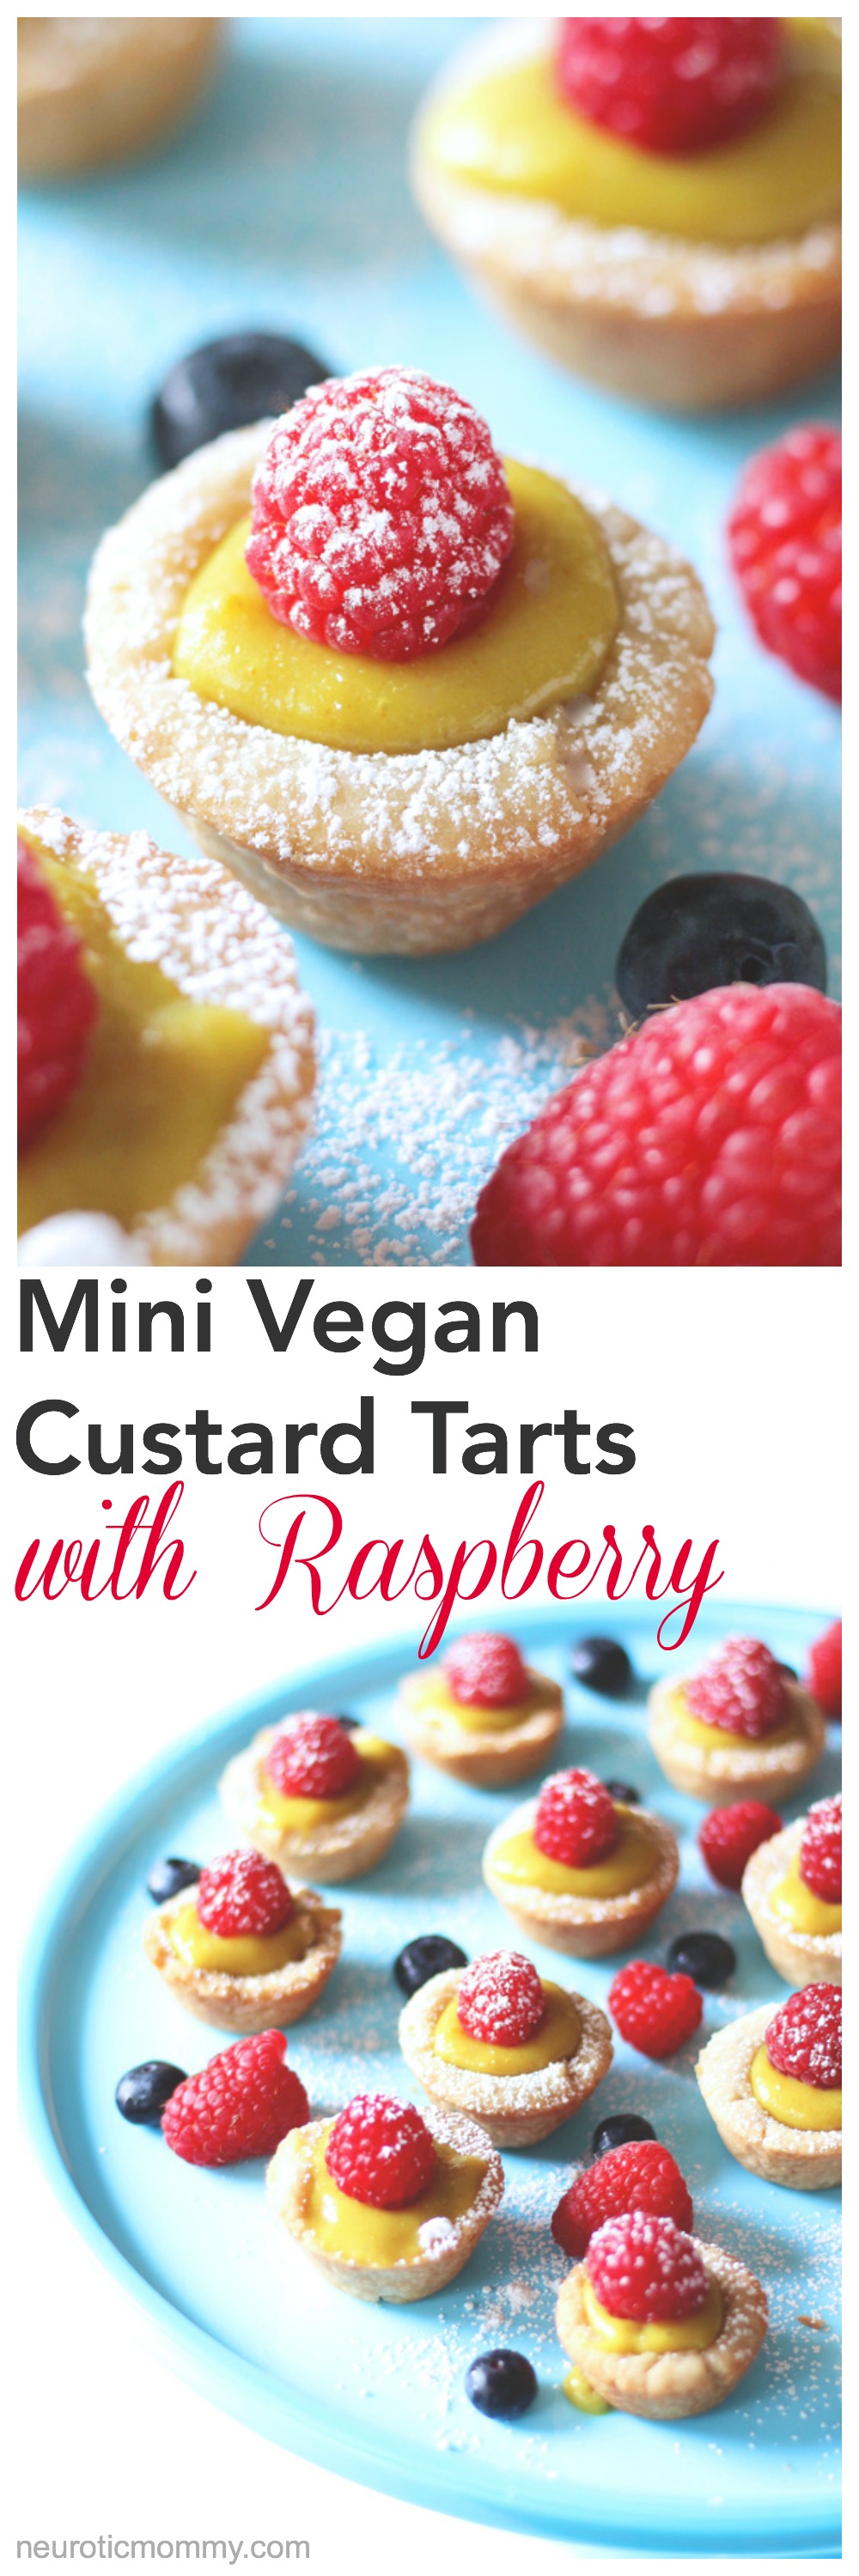 Mini Vegan Custard Tarts with Raspberry - These tarts are made with a cake crust and filled with a creamy, dreamy, heavenly vegan custard. Topped off with fresh raspberries and powdered coconut shreds for extra sparkle, making these bites sugar freakin' free! NeuroticMommy.com #vegan #healthysnacks